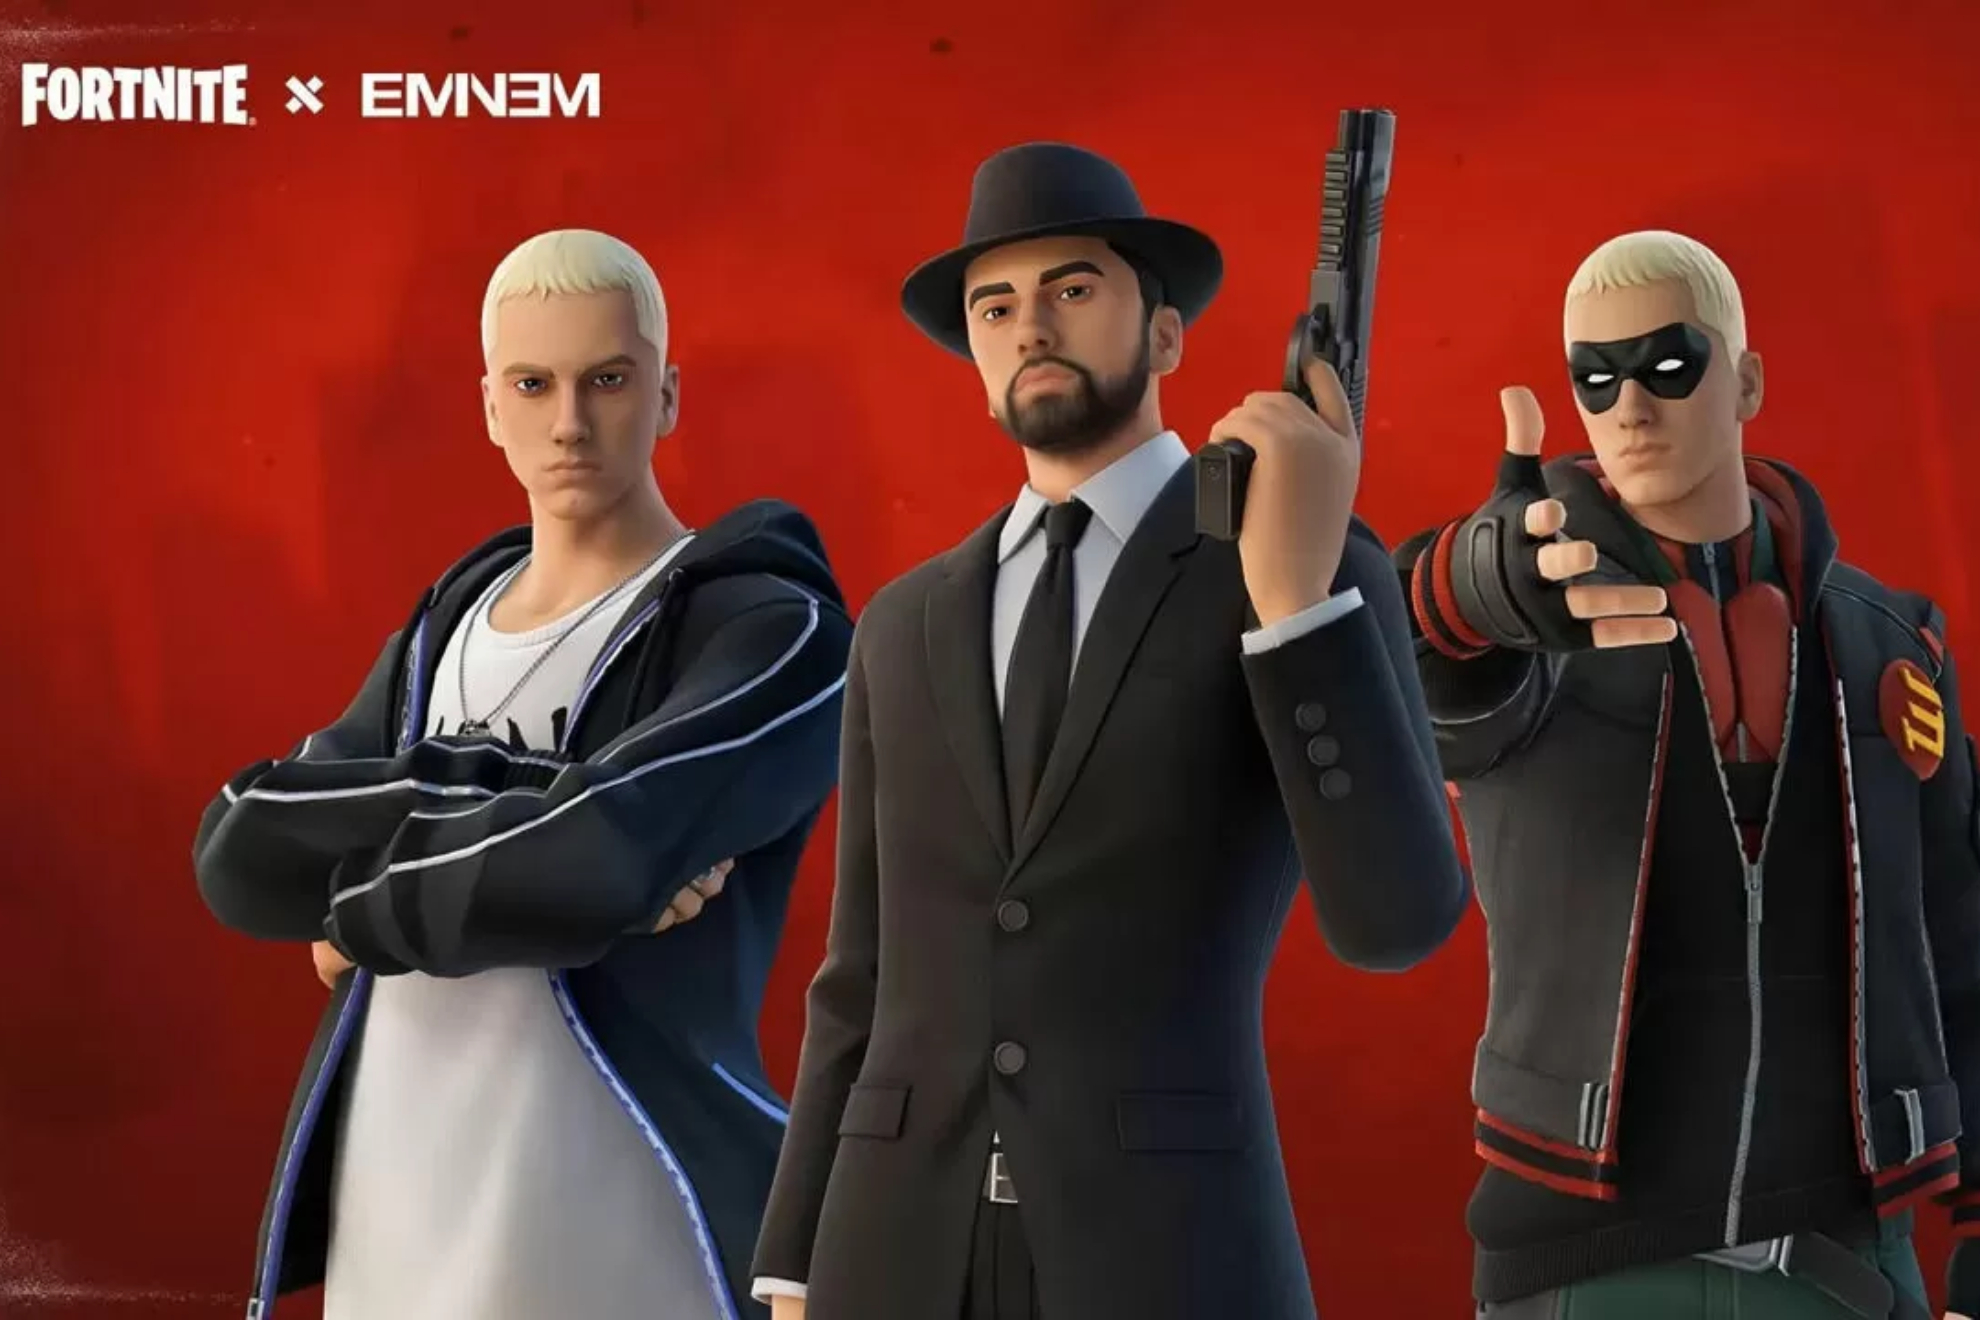 Eminem and Fortnite event: Day, time and where to watch Eminem's concert live | Marca